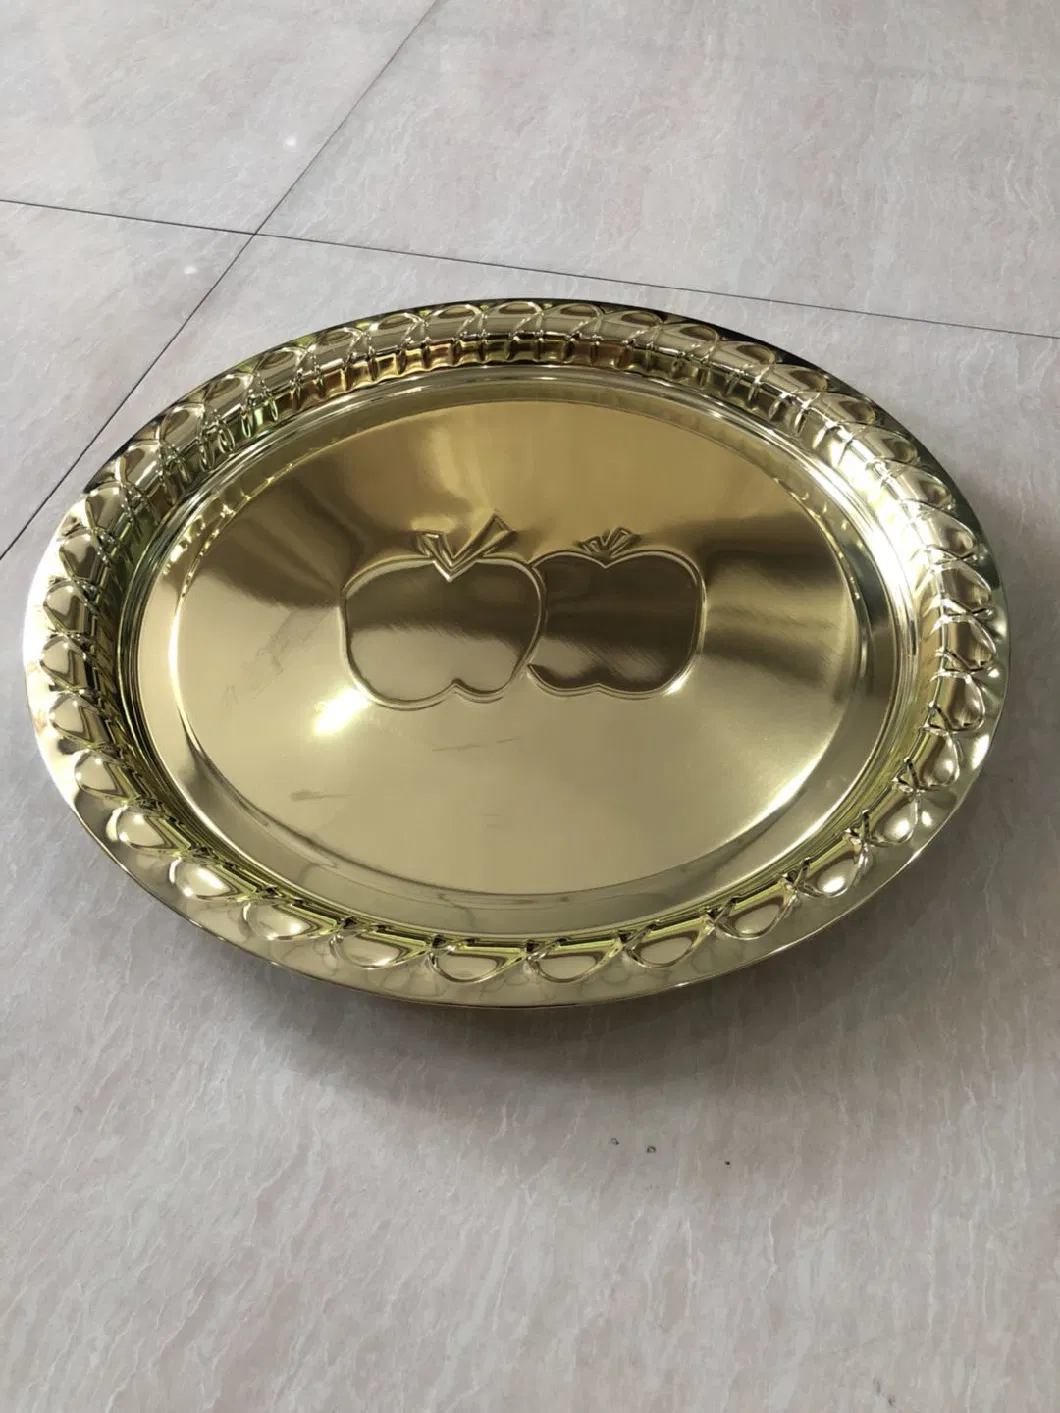 Stainless Steel Serving Tray Metal Round Food Dinner Diamond Plates Fruit